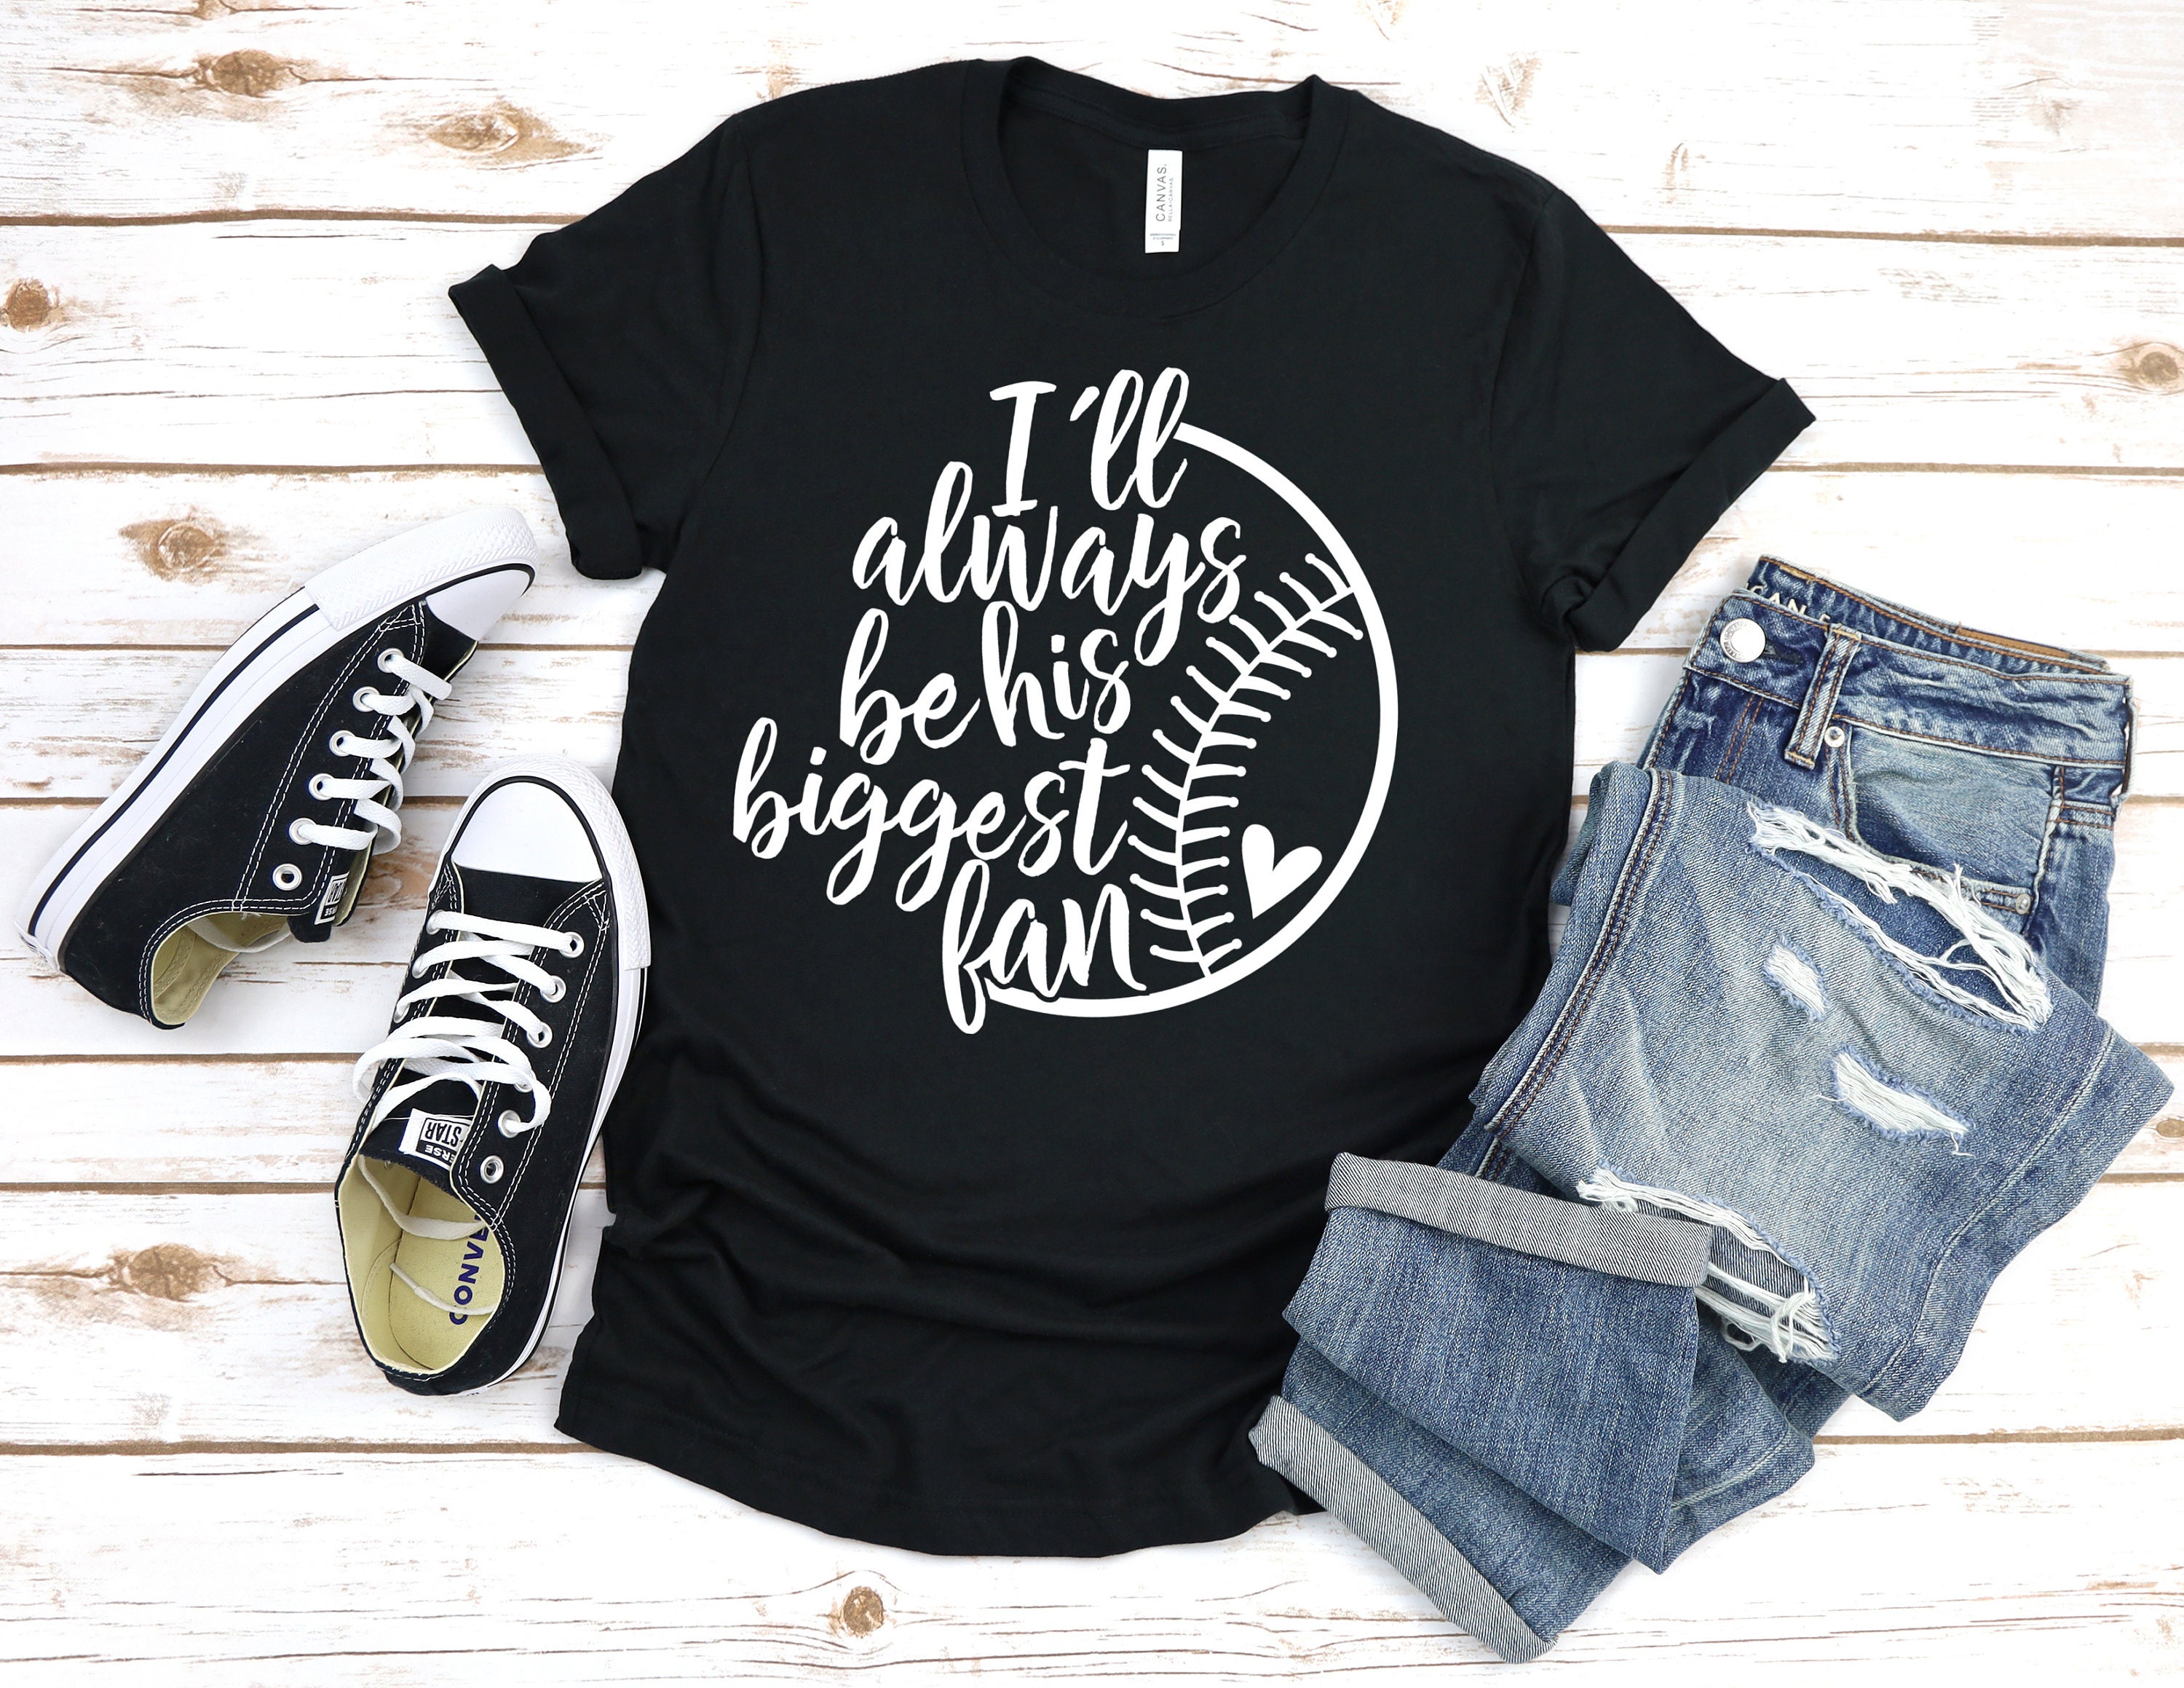 I'll Always Be Your Biggest Fan shirt  Semi Fitted OR Flowy Fit Tank Top Available  Baseball Mom shirt  Softball Mom shirt  Sports Mom